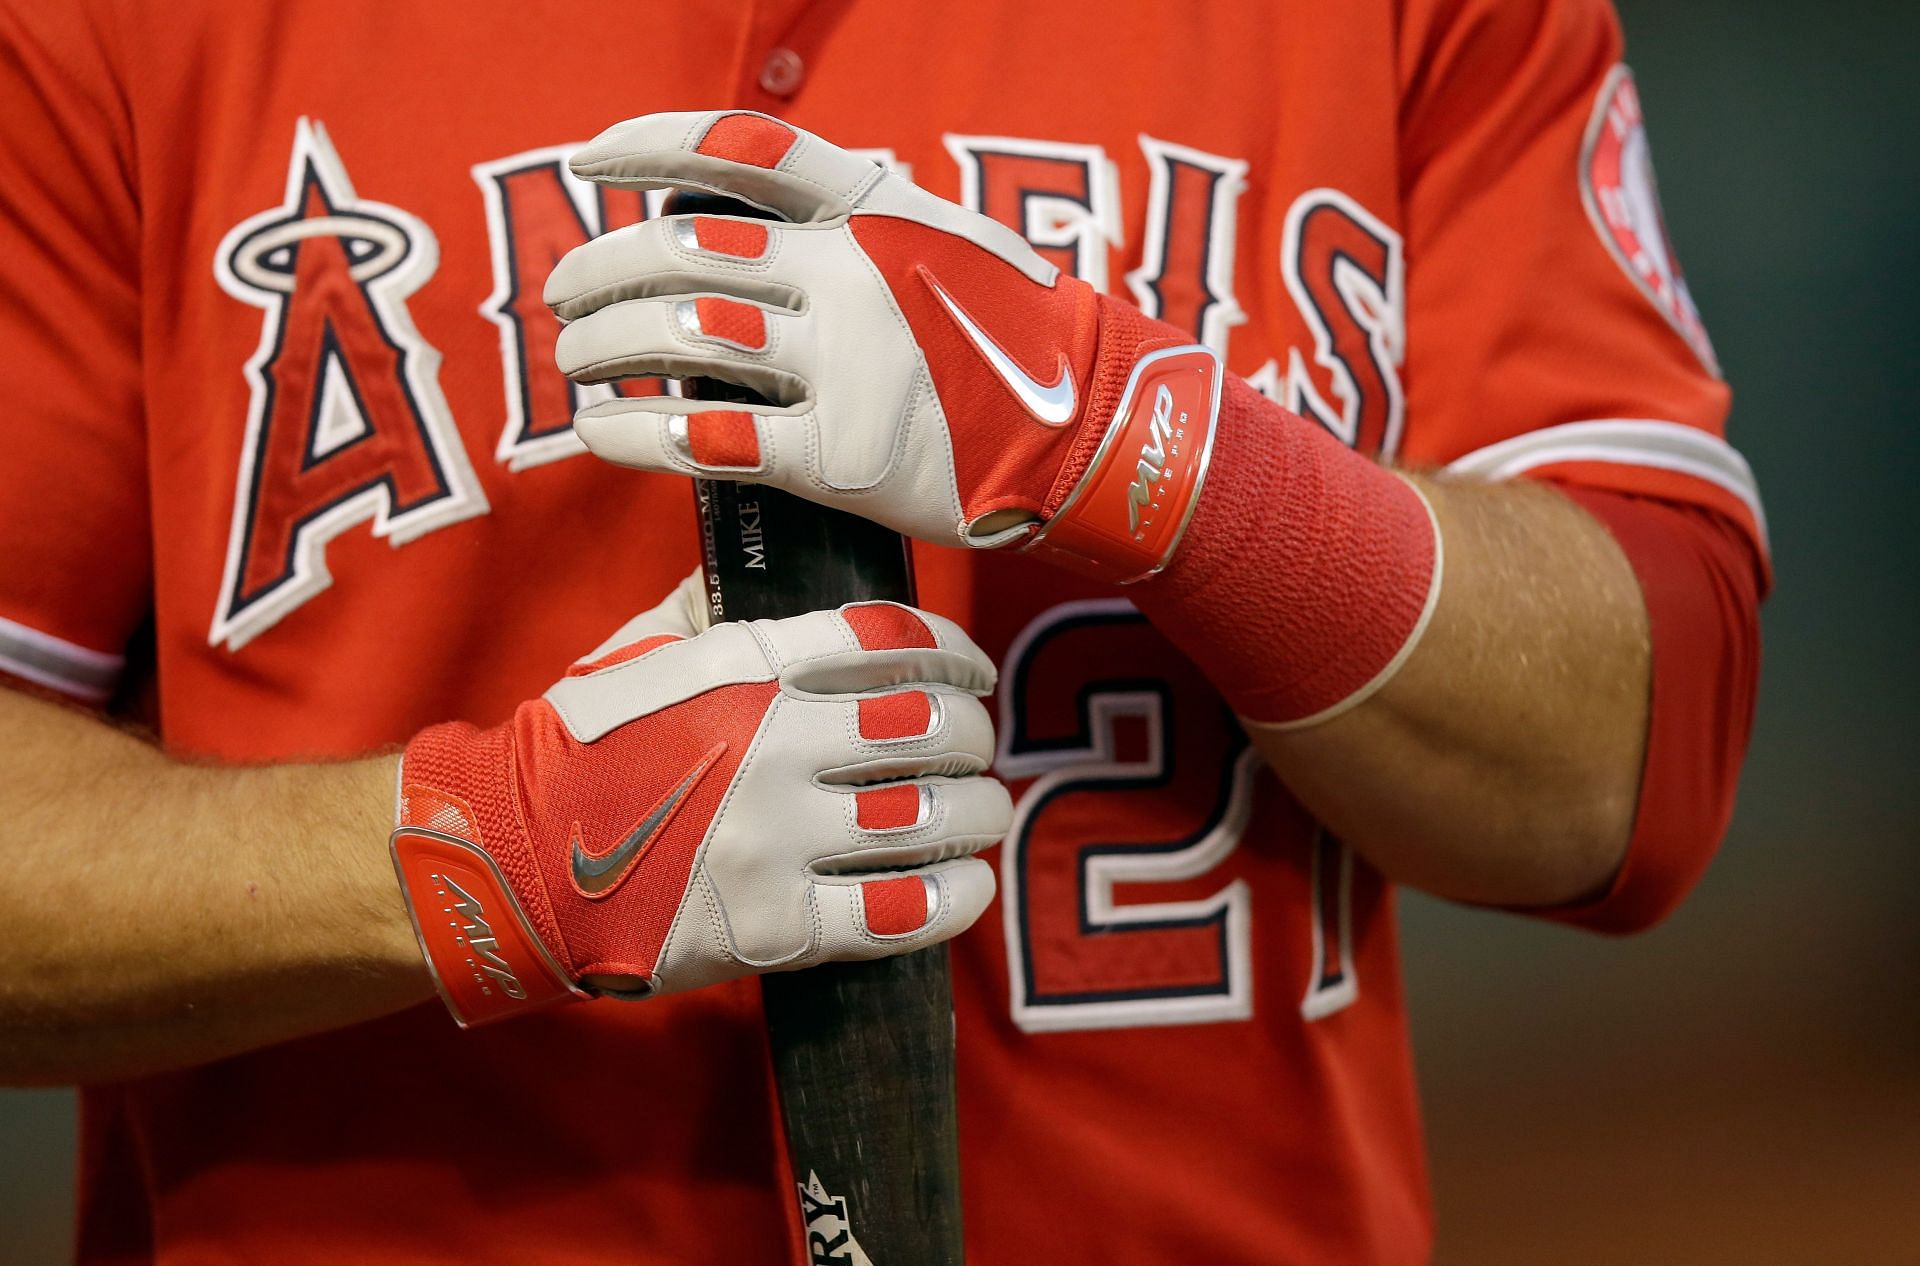 Mike Trout of the LA Angels is sure to be in the Hall of Fame some day.